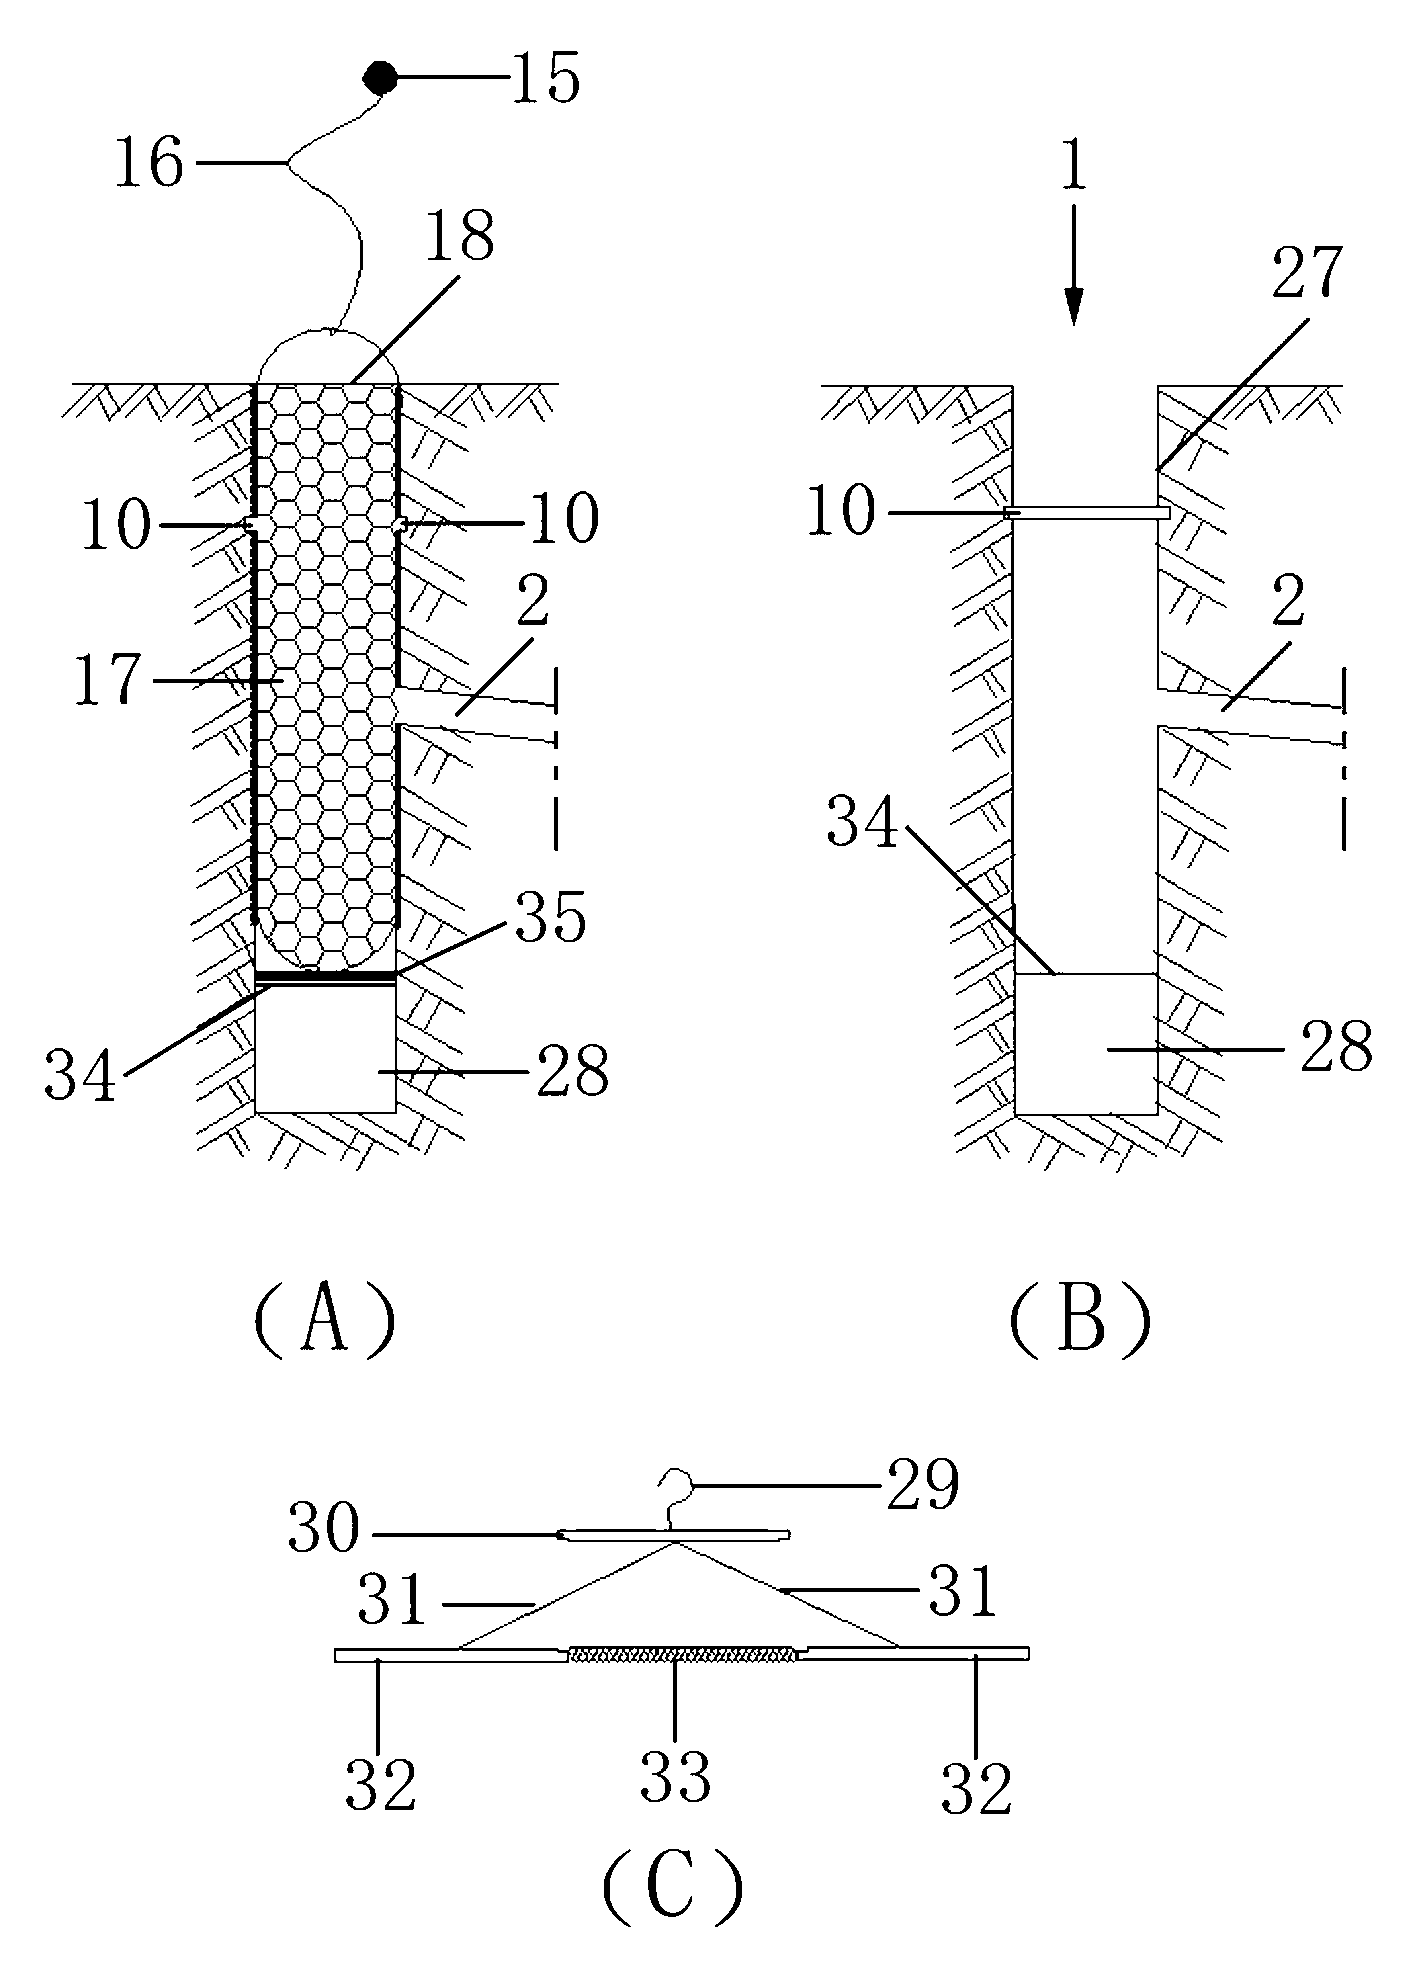 Salt discharge treatment system for salted reservoir, building method and treatment method for salted water